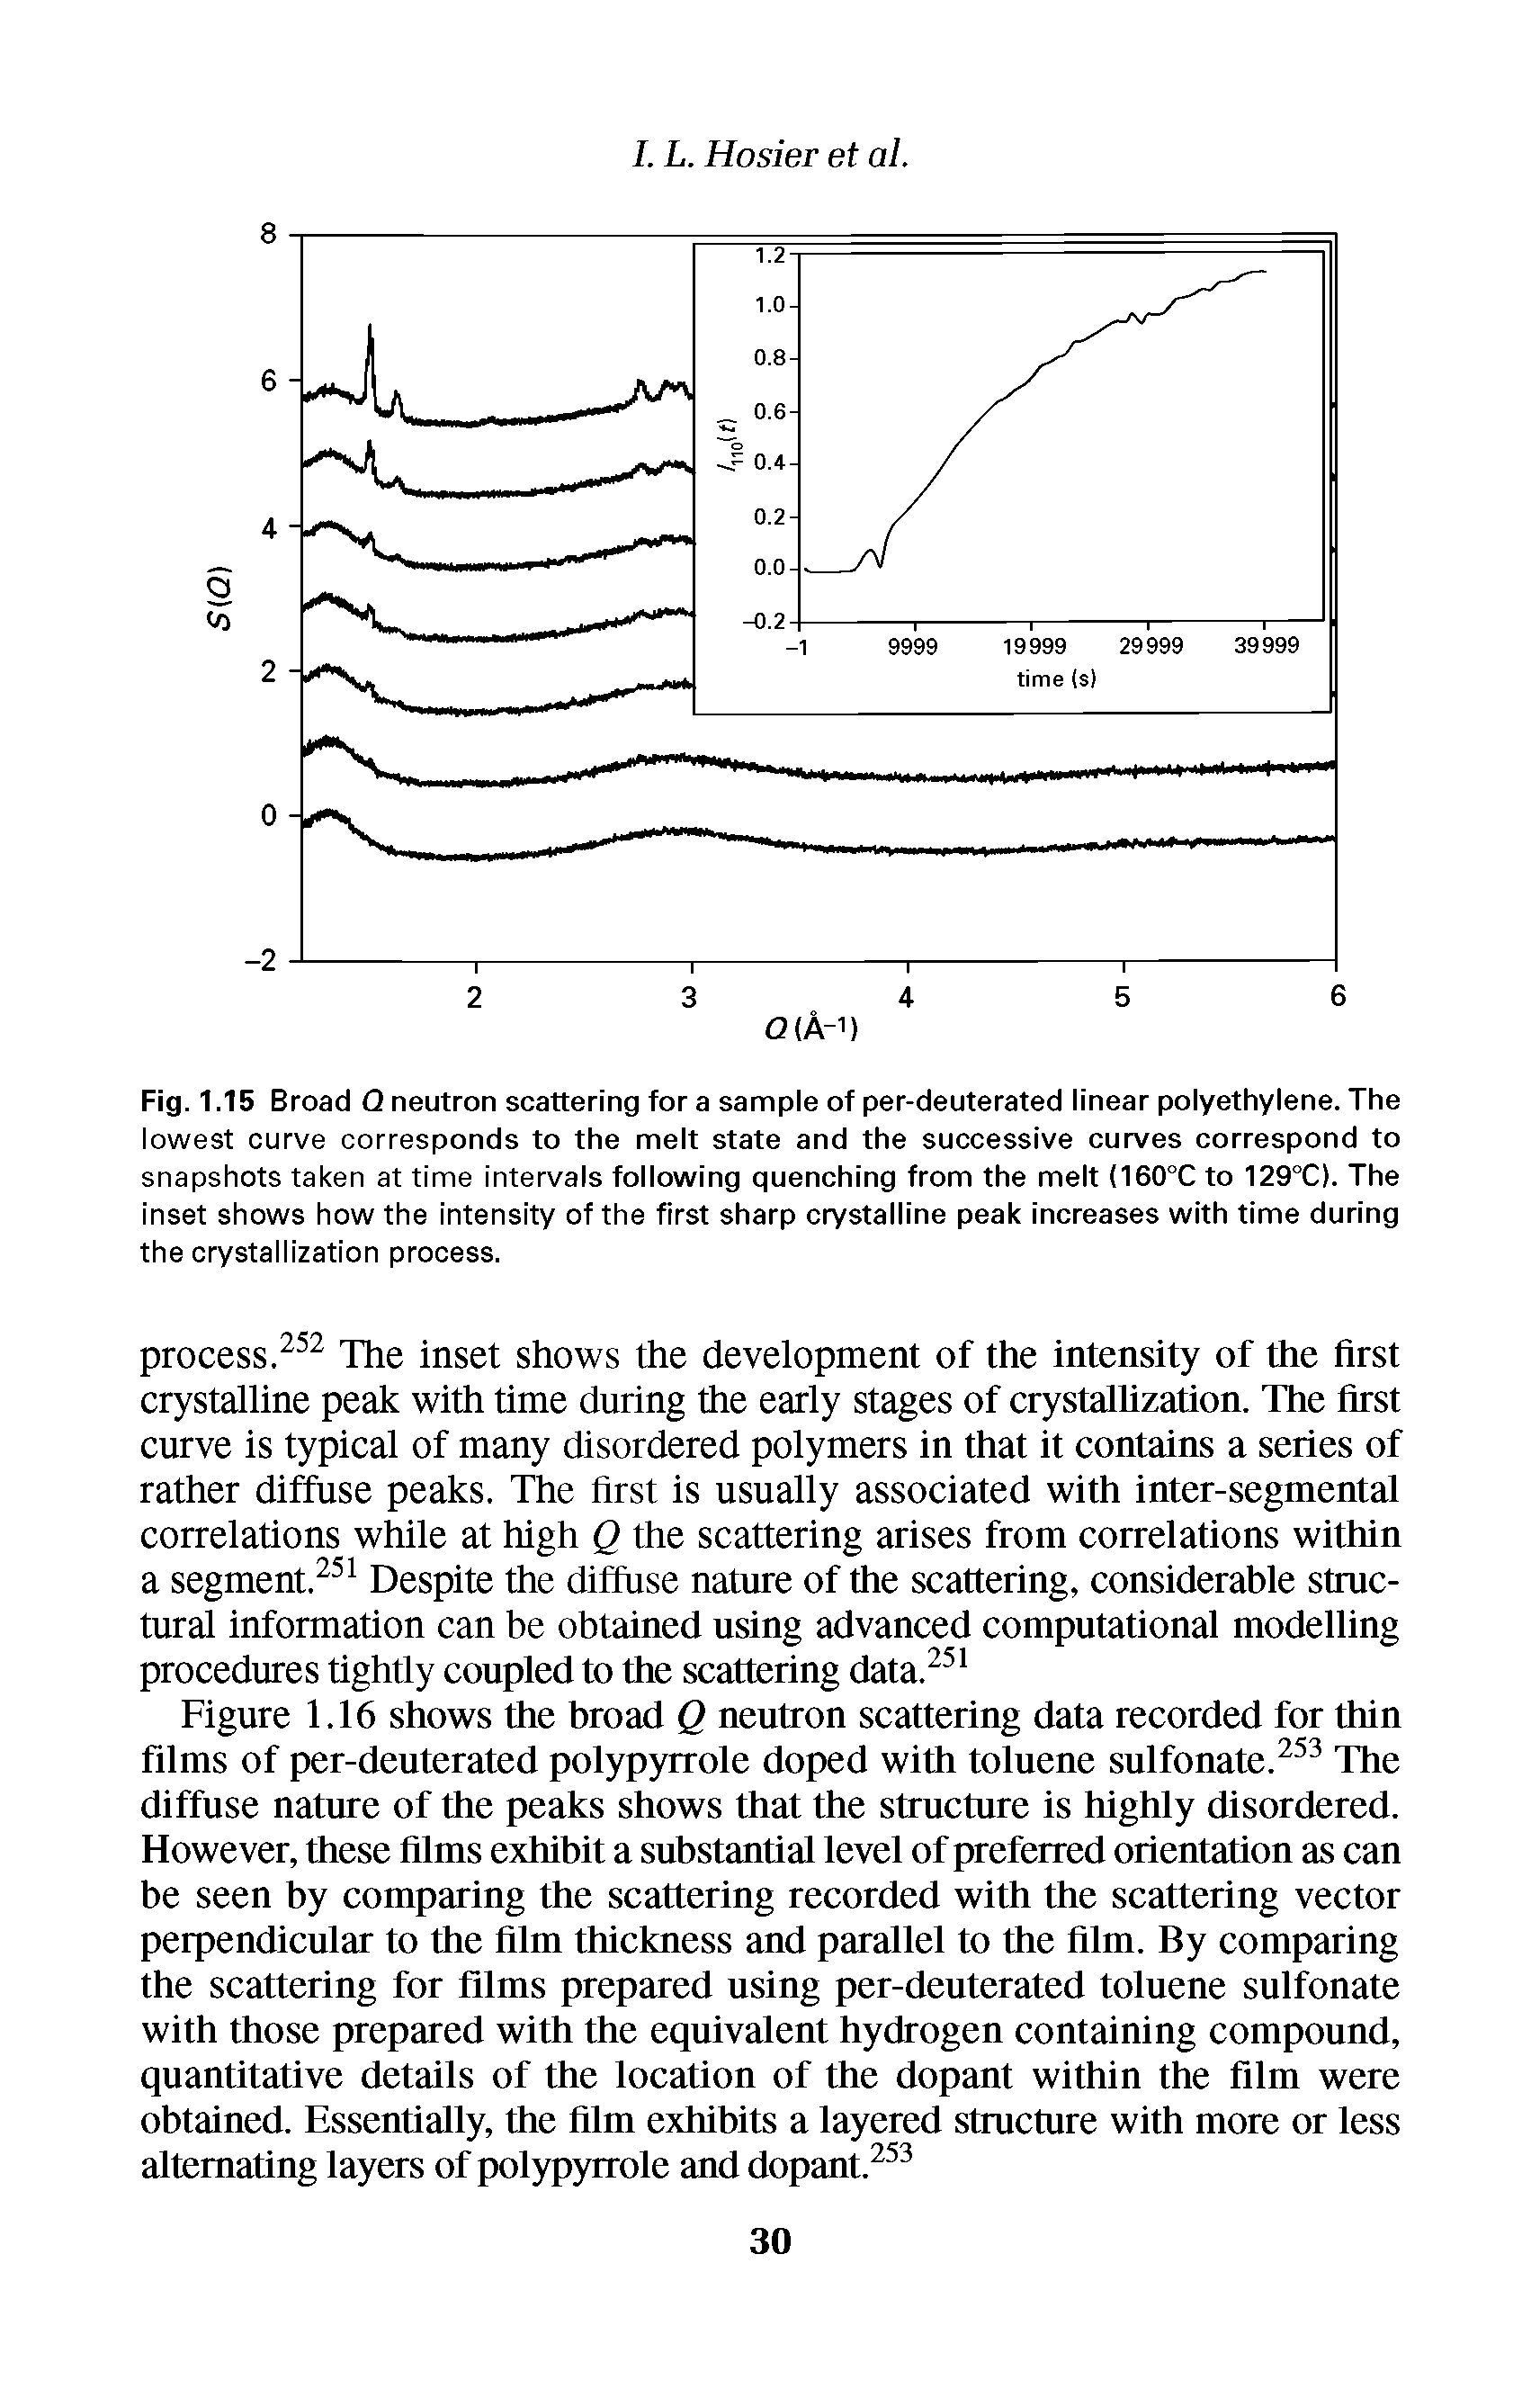 Fig. 1.15 Broad Q neutron scattering for a sample of per-deuterated linear polyethylene. The lowest curve corresponds to the melt state and the successive curves correspond to snapshots taken at time intervals following quenching from the melt (160°C to 129°C). The inset shows how the intensity of the first sharp crystalline peak increases with time during the crystallization process.